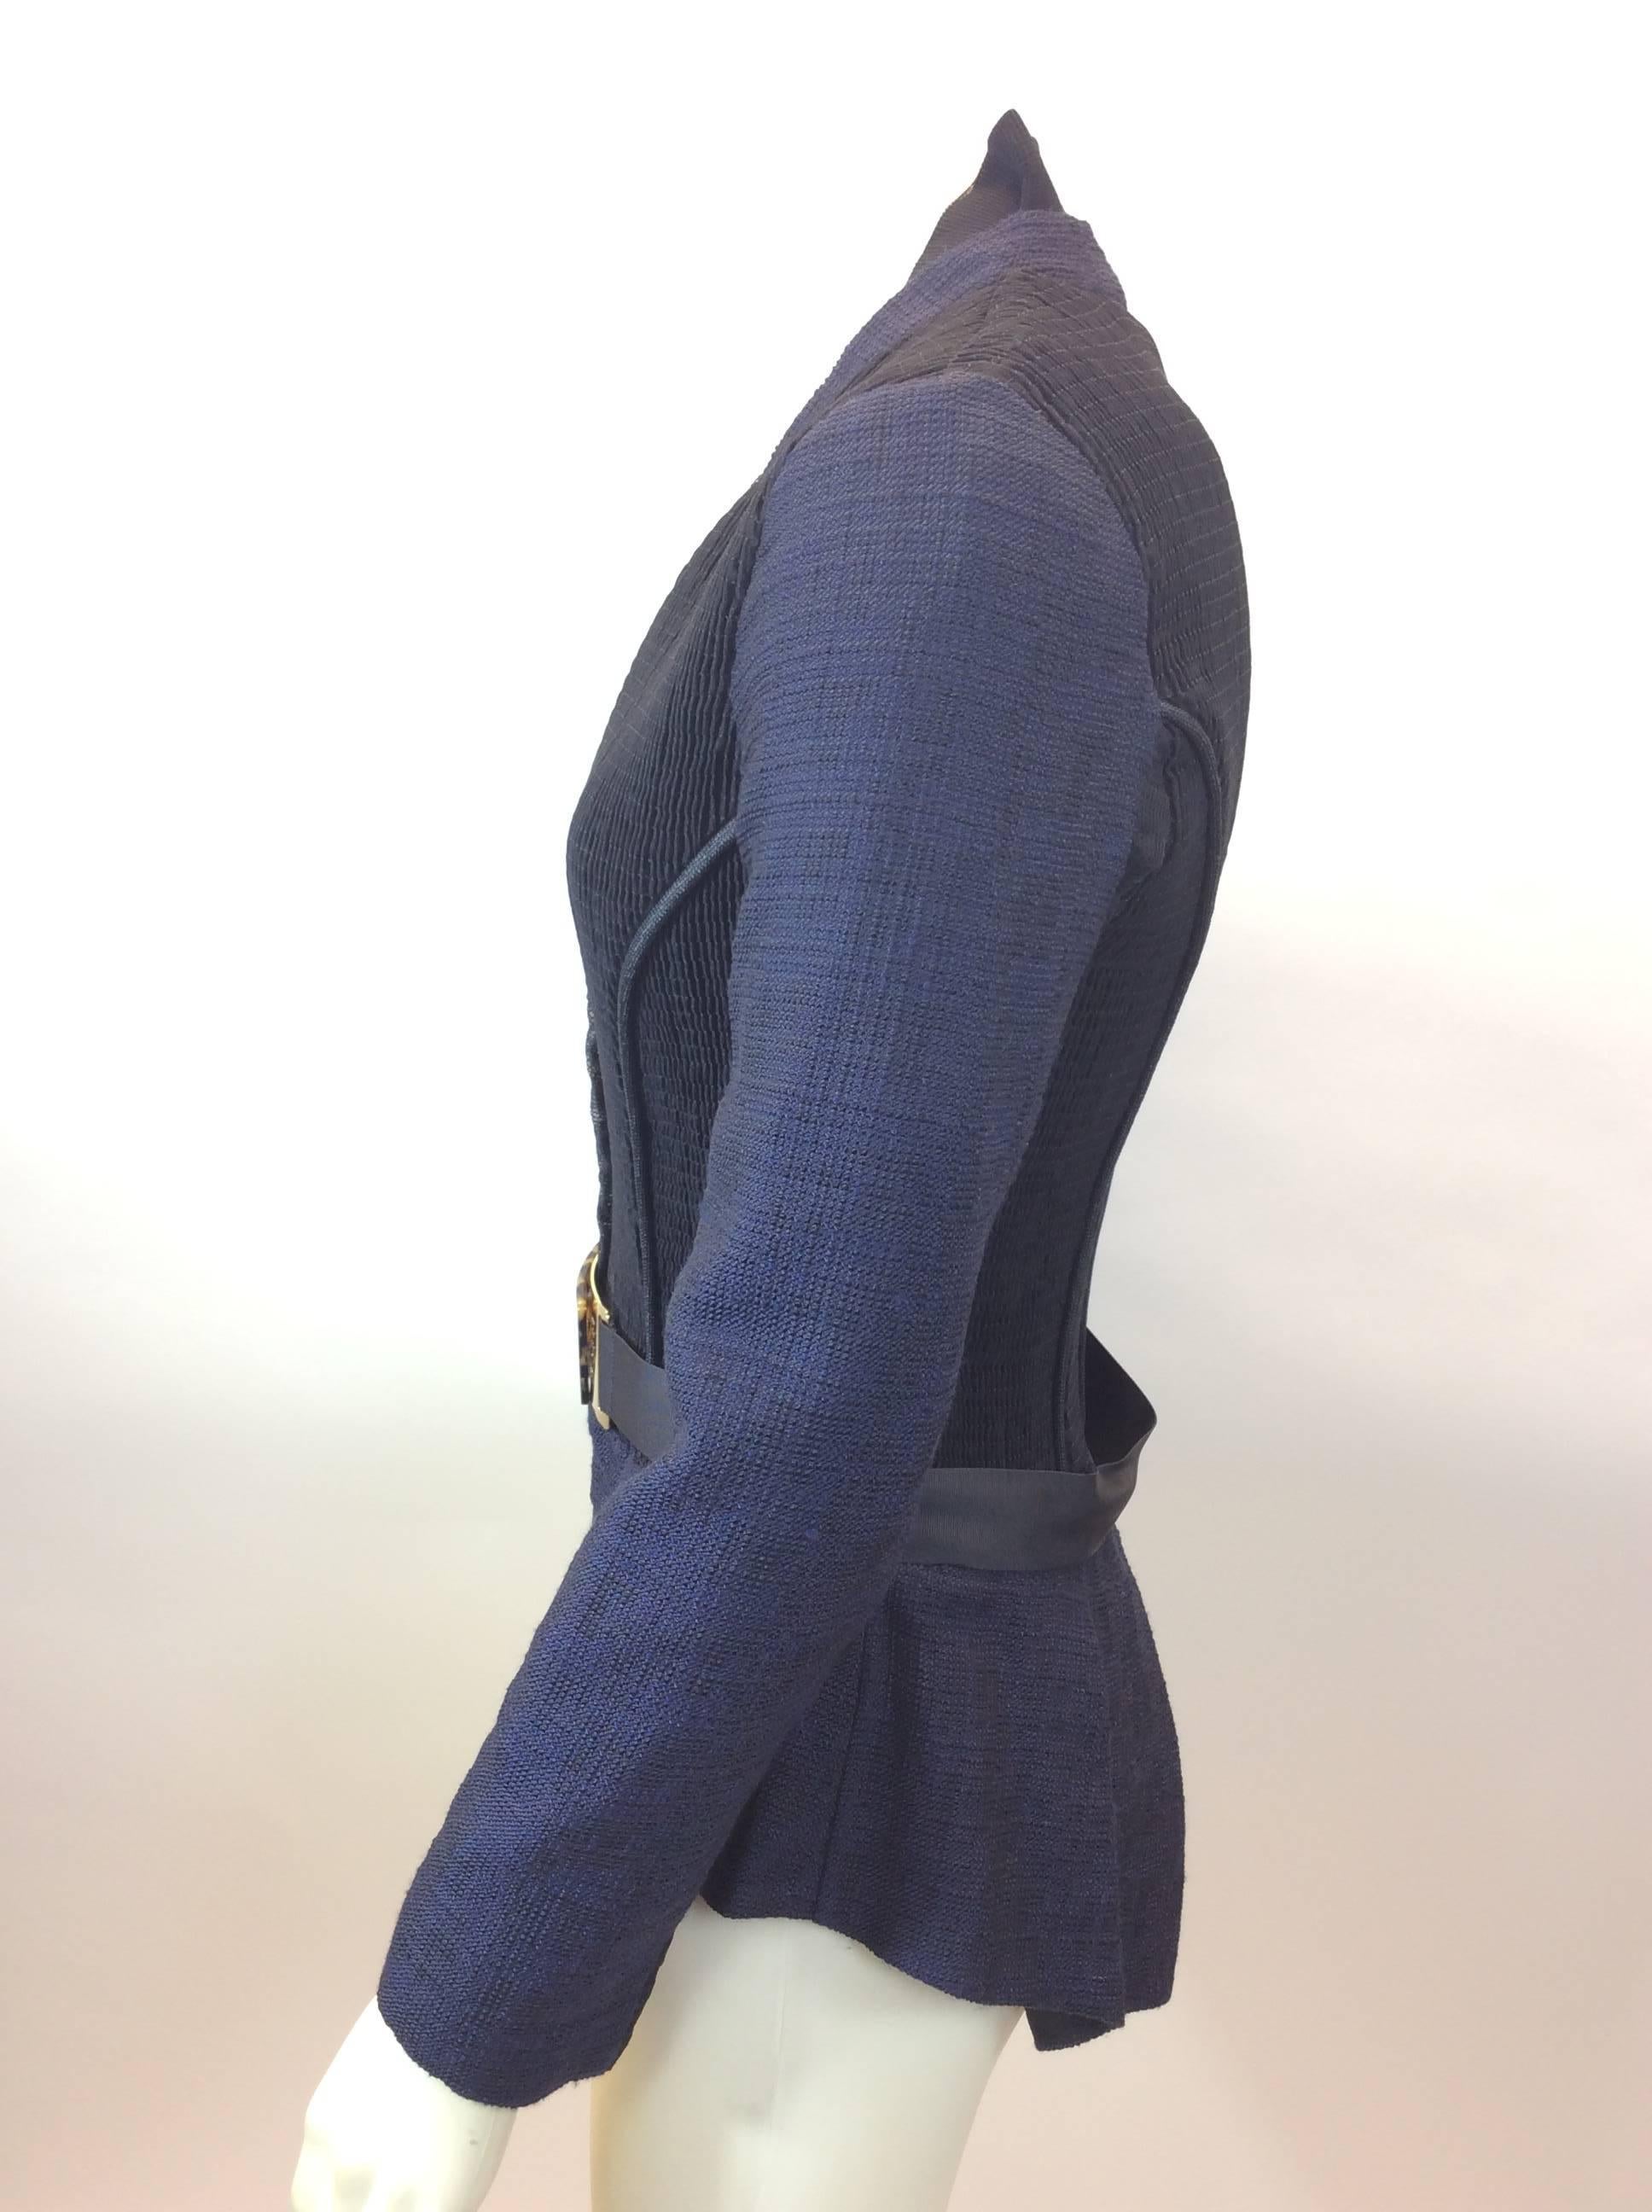 Fendi Navy Blue and Black Jacket
With Belt
$799
Made in Italy
Size 44
Length 23